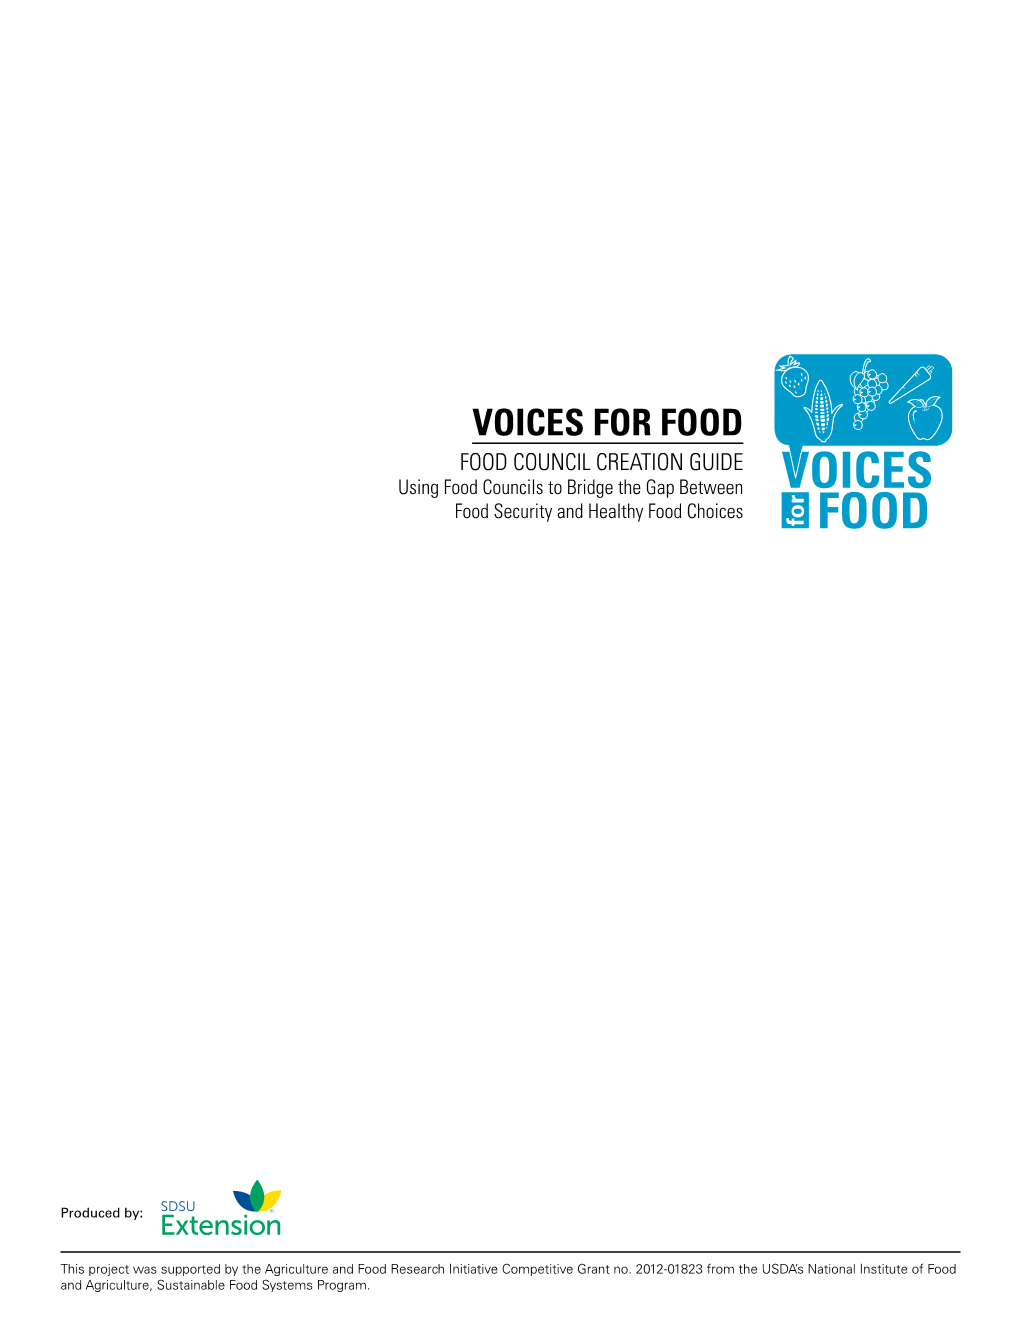 Voices for Food: Food Council Creation Guide